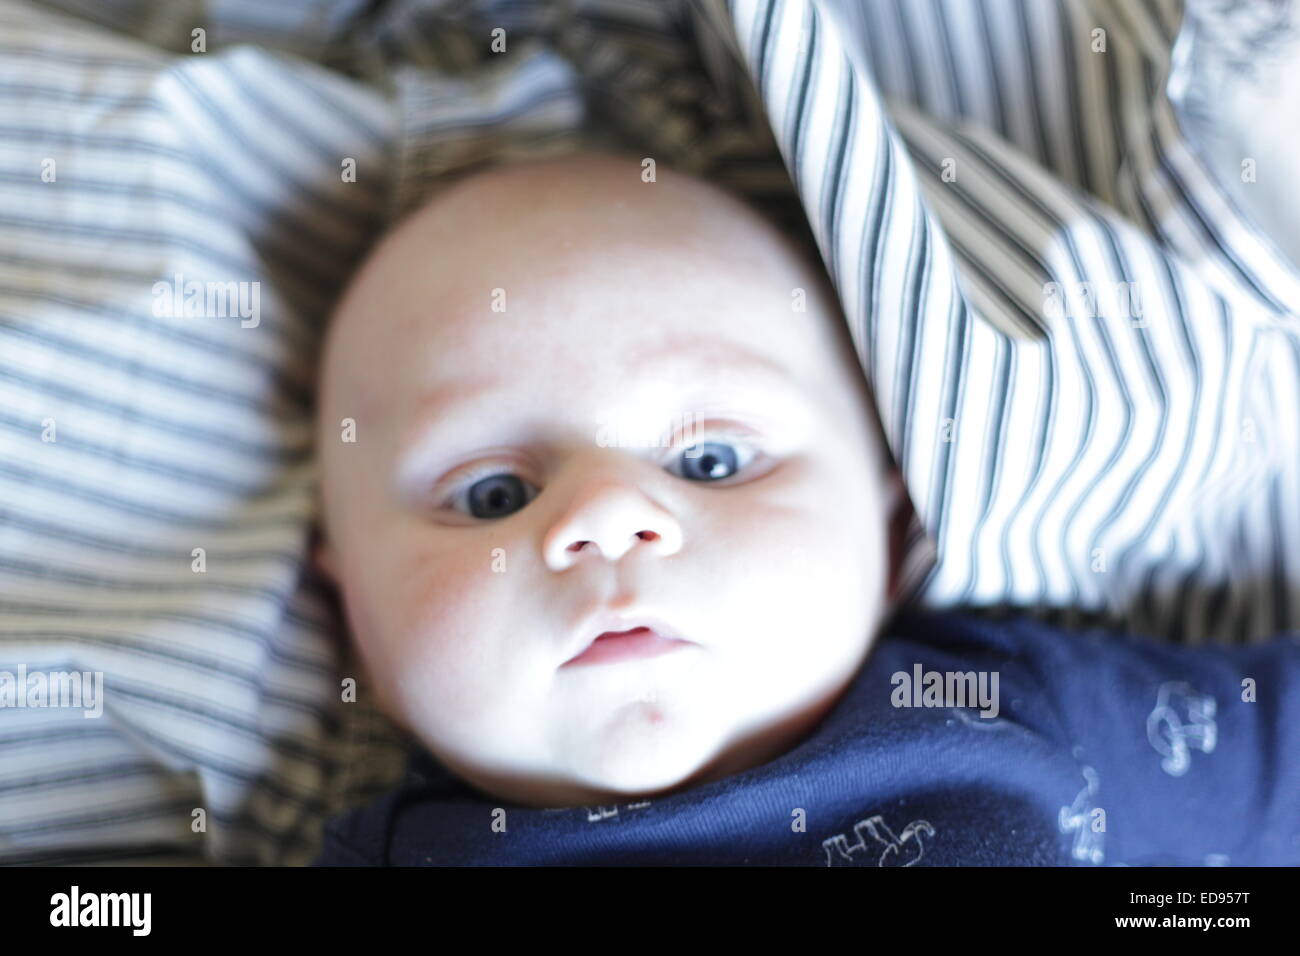 baby boy with blue eyes laying on a bed Stock Photo